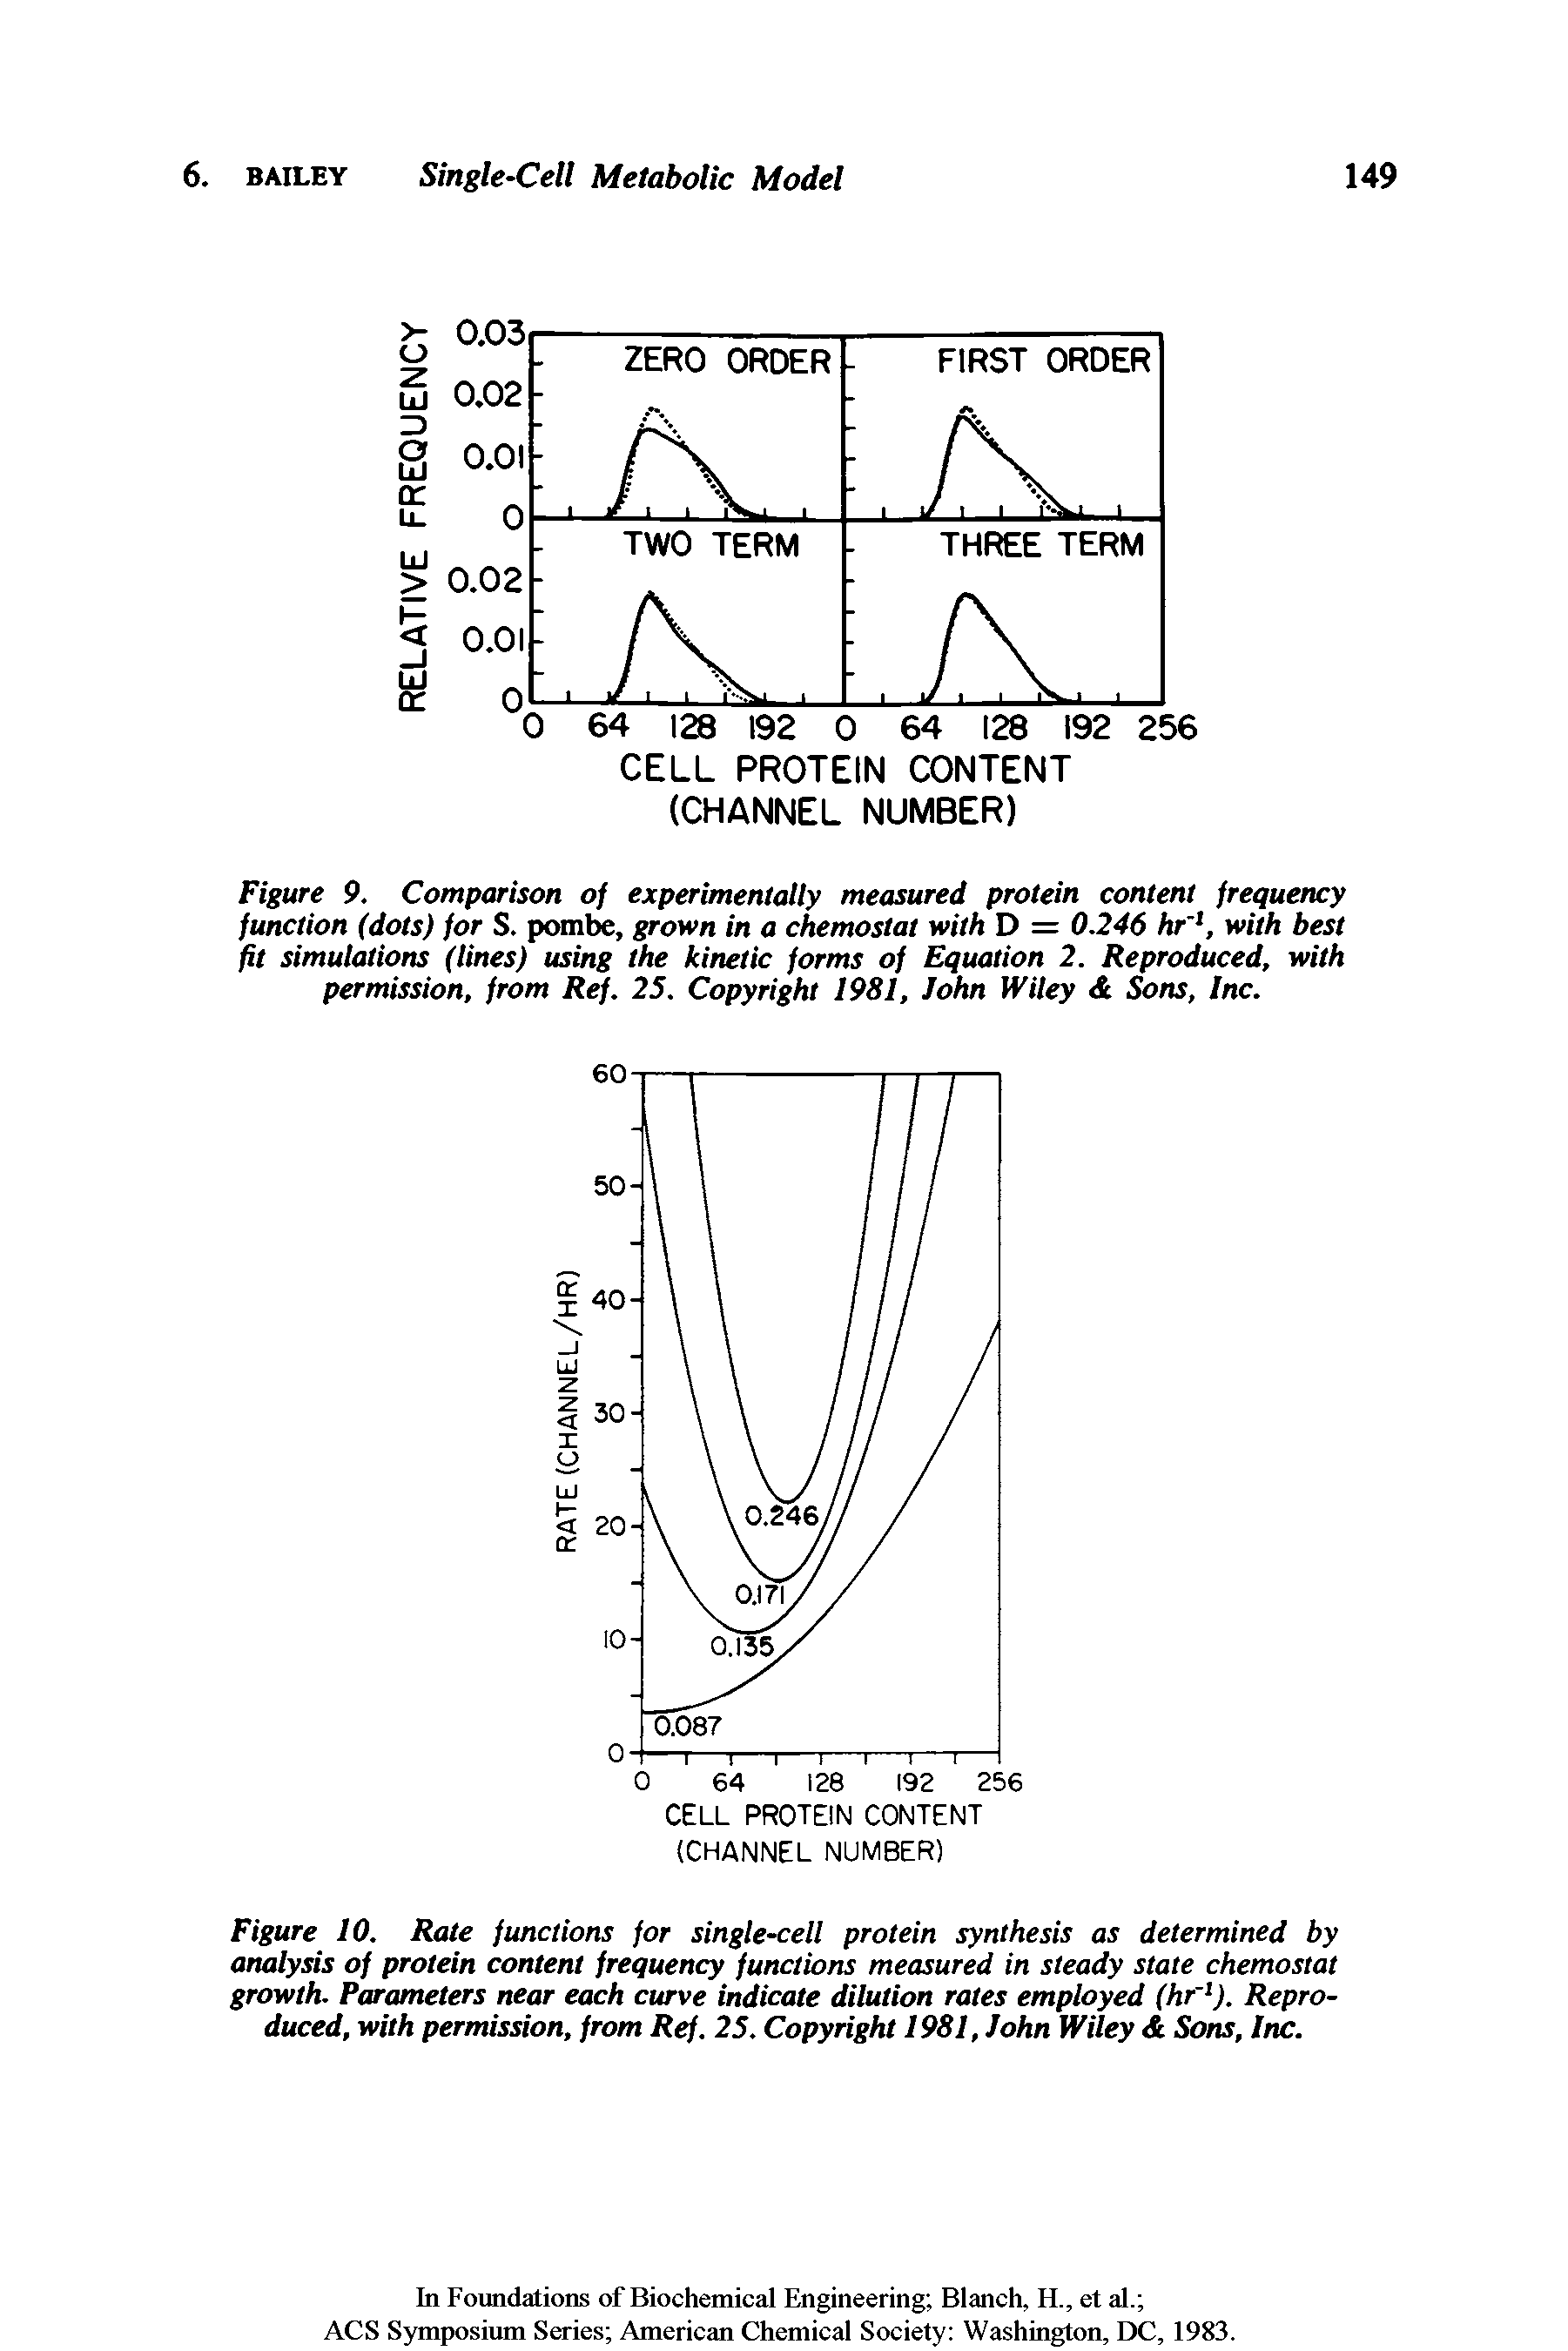 Figure 10. Rate functions for single-cell protein synthesis as determined by analysis of protein content frequency functions measured in steady state chemostat growth. Parameters near each curve indicate dilution rates employed (hr ). Reproduced, with permission, from Ref. 25. Copyright 1981, John Wiley Sons, Inc.